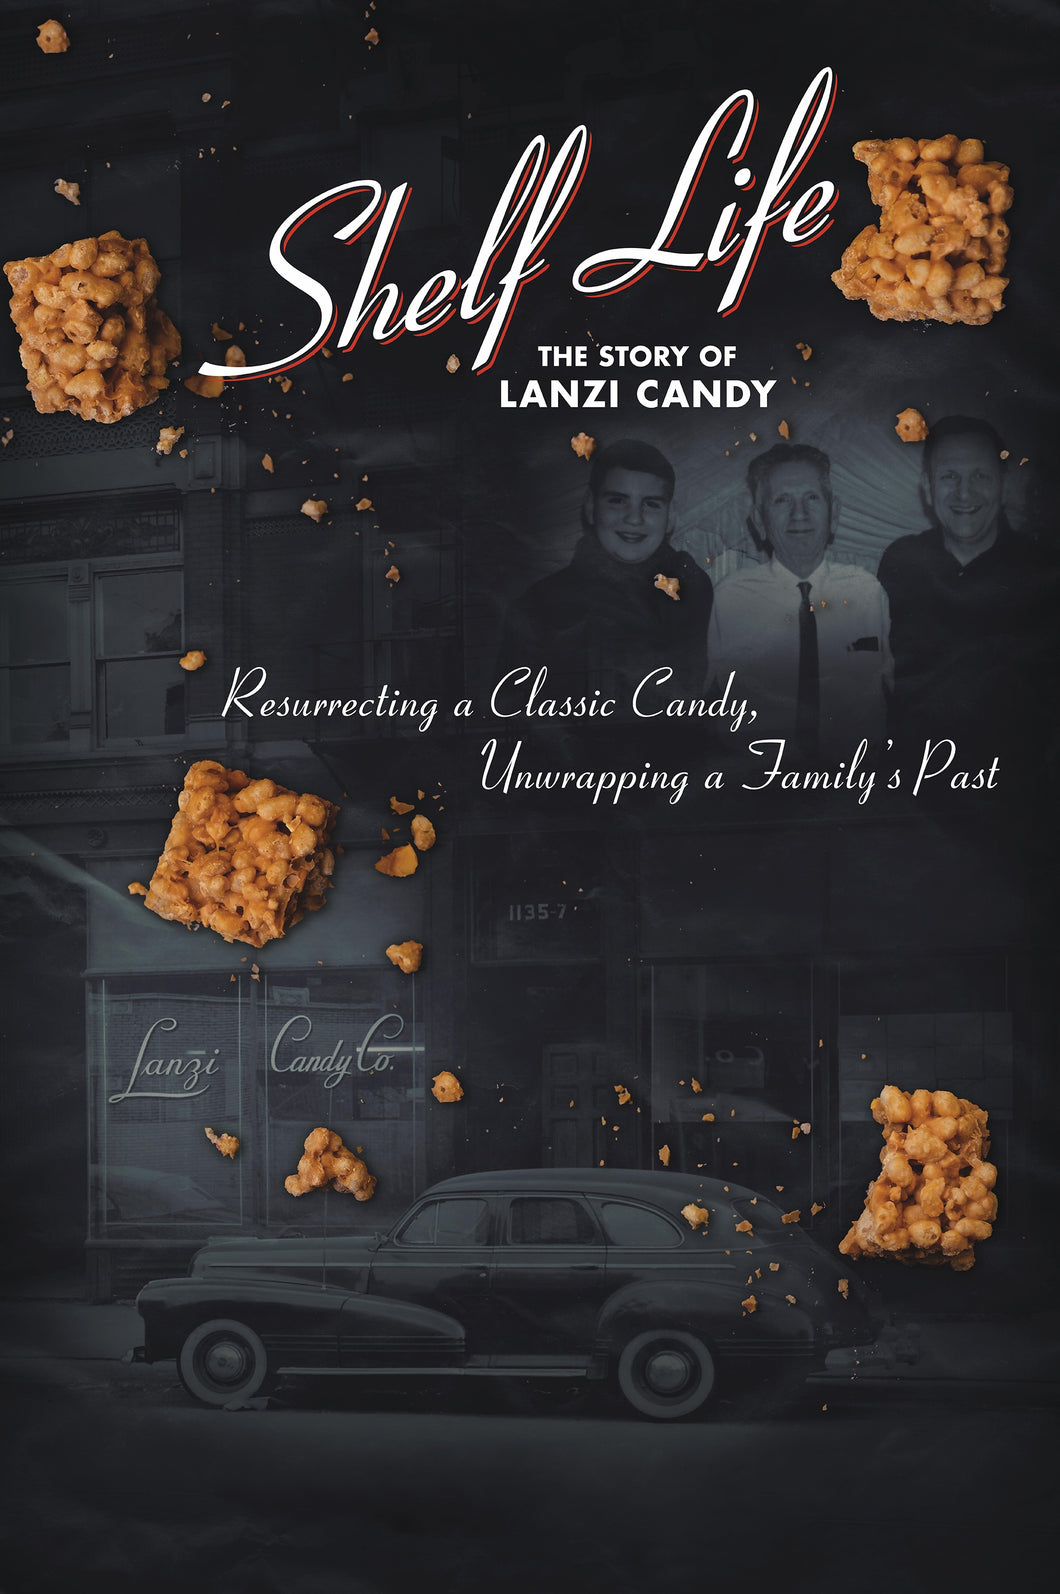 Shelf Life DVD  The documentary about Lanzi's candy